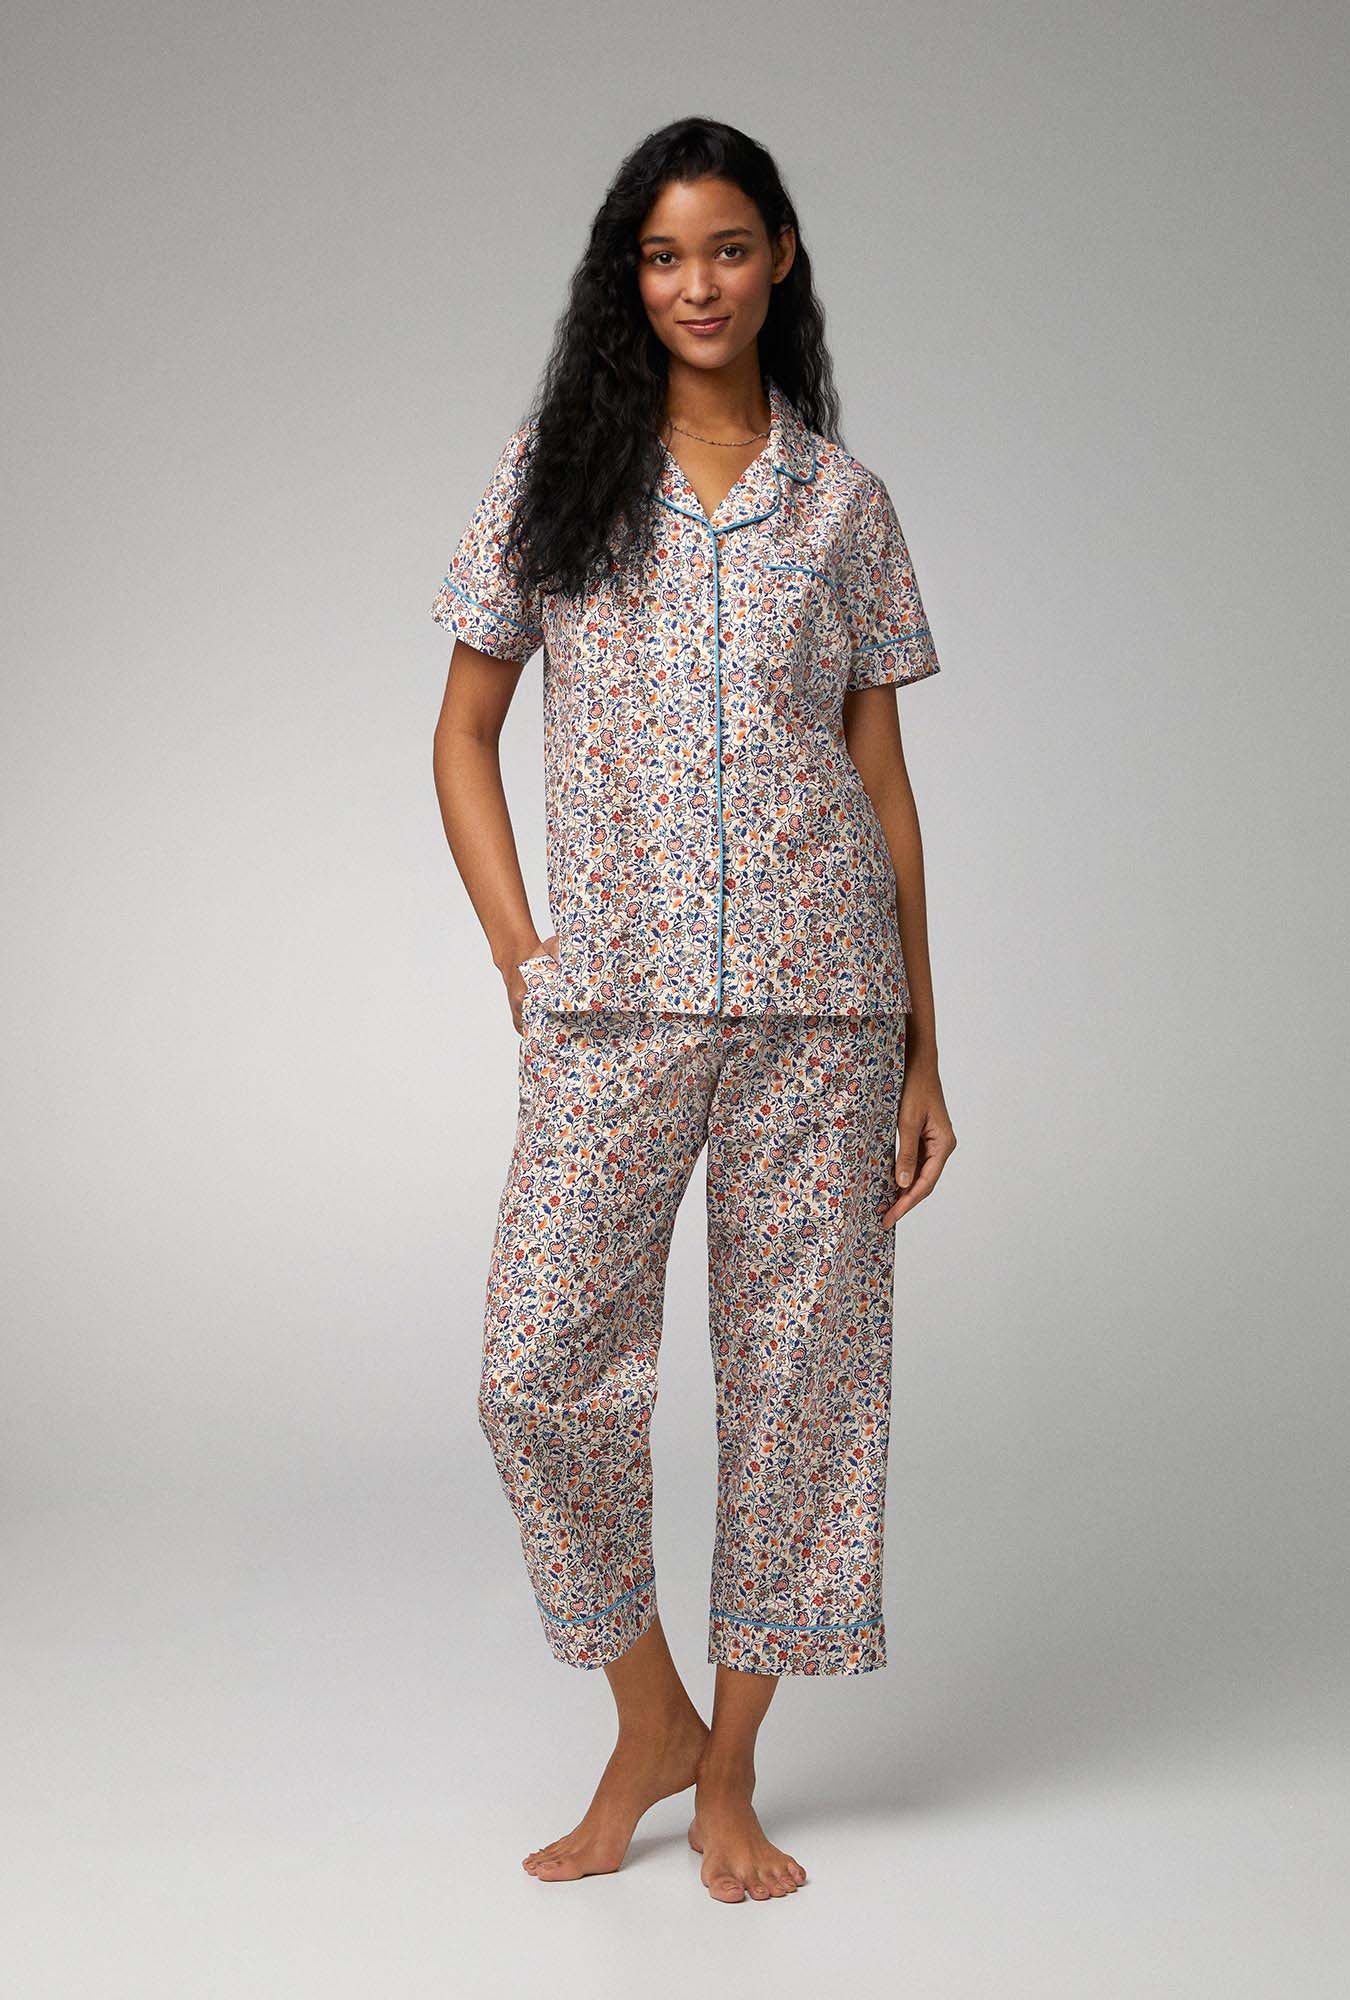 A lady wearing white  Short Sleeve Classic Woven Cotton Silk Cropped PJ Set with Country Meadow  print